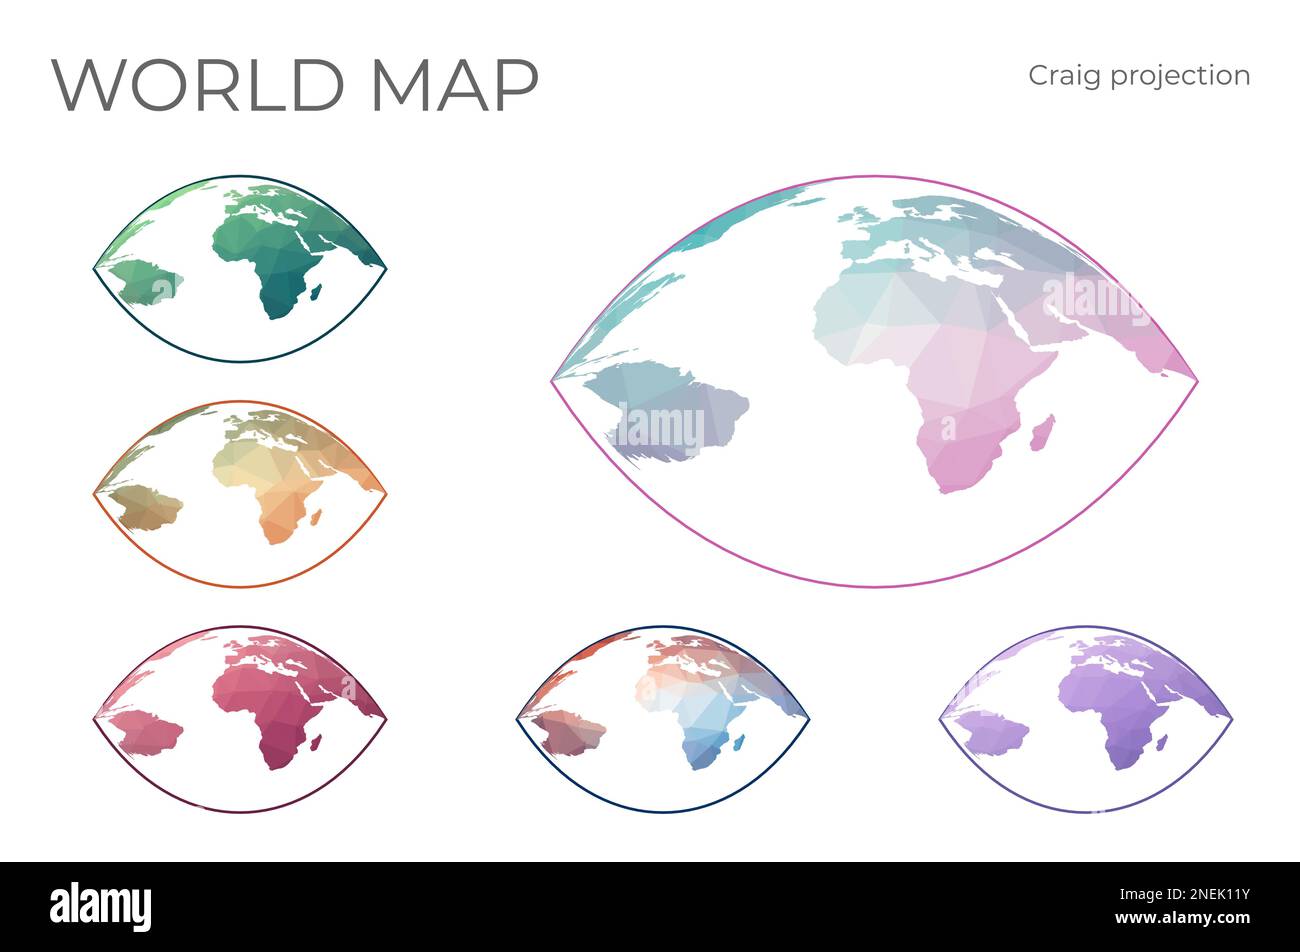 Low Poly World Map Set. Craig retroazimuthal projection. Collection of the world maps in geometric style. Vector illustration. Stock Vector